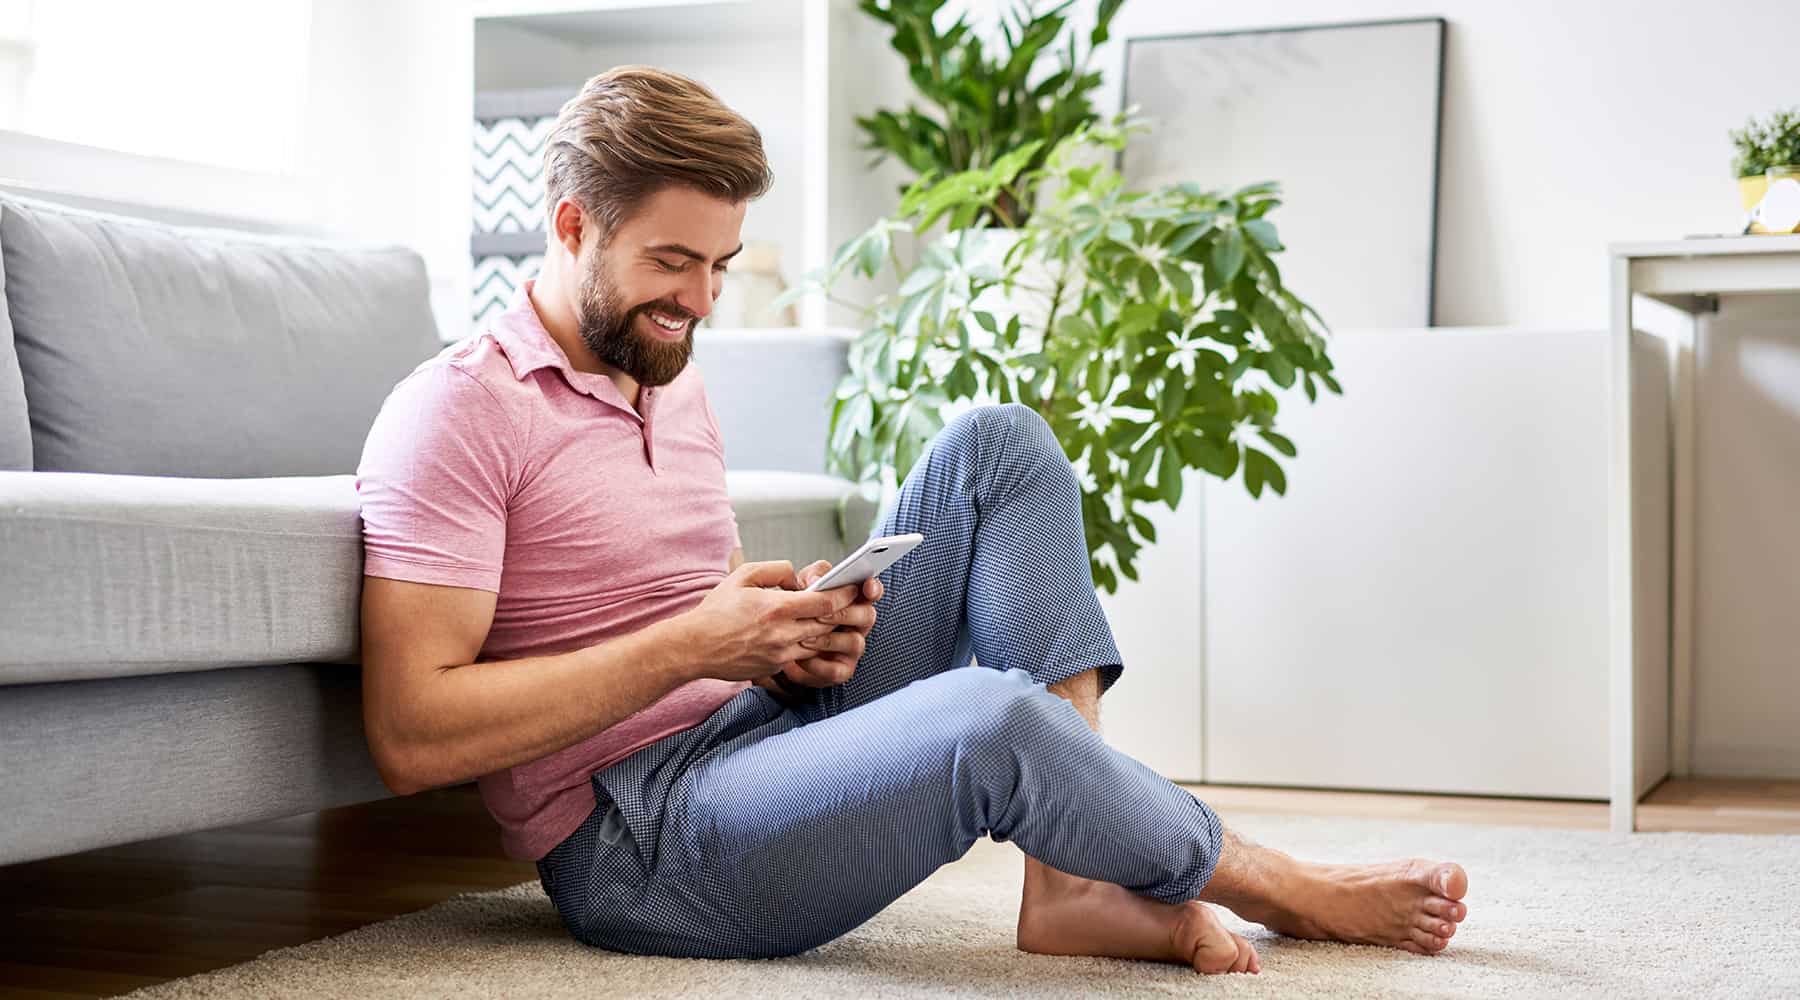 Nicely dressed man sitting on the hardwood floors of an apartment, smiling and looking at his cell phone.